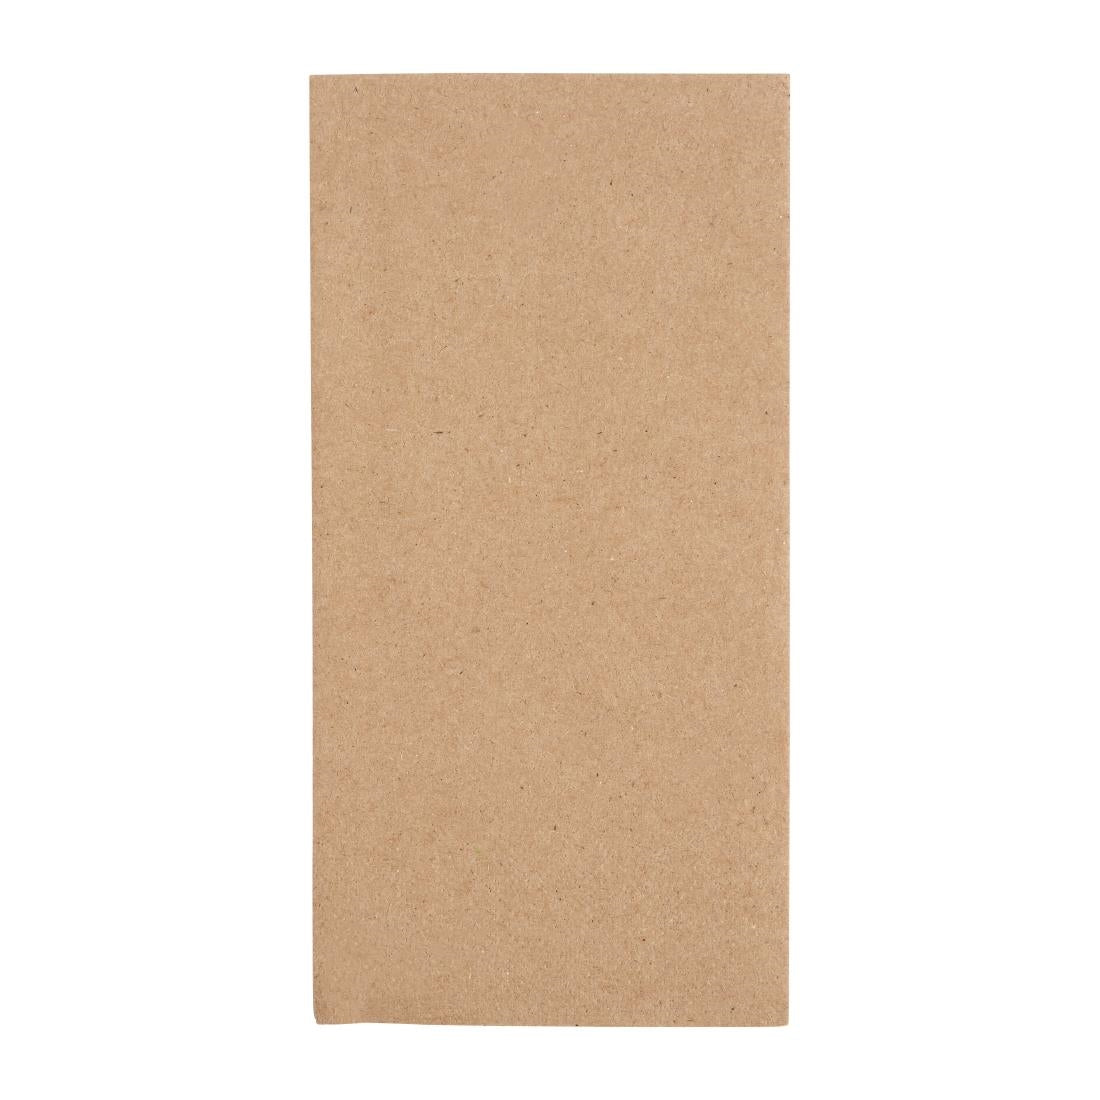 FE250 Fiesta Recyclable Recycled Dinner Napkin Kraft 40x40cm 2ply 1/8 Fold (Pack of 2000)